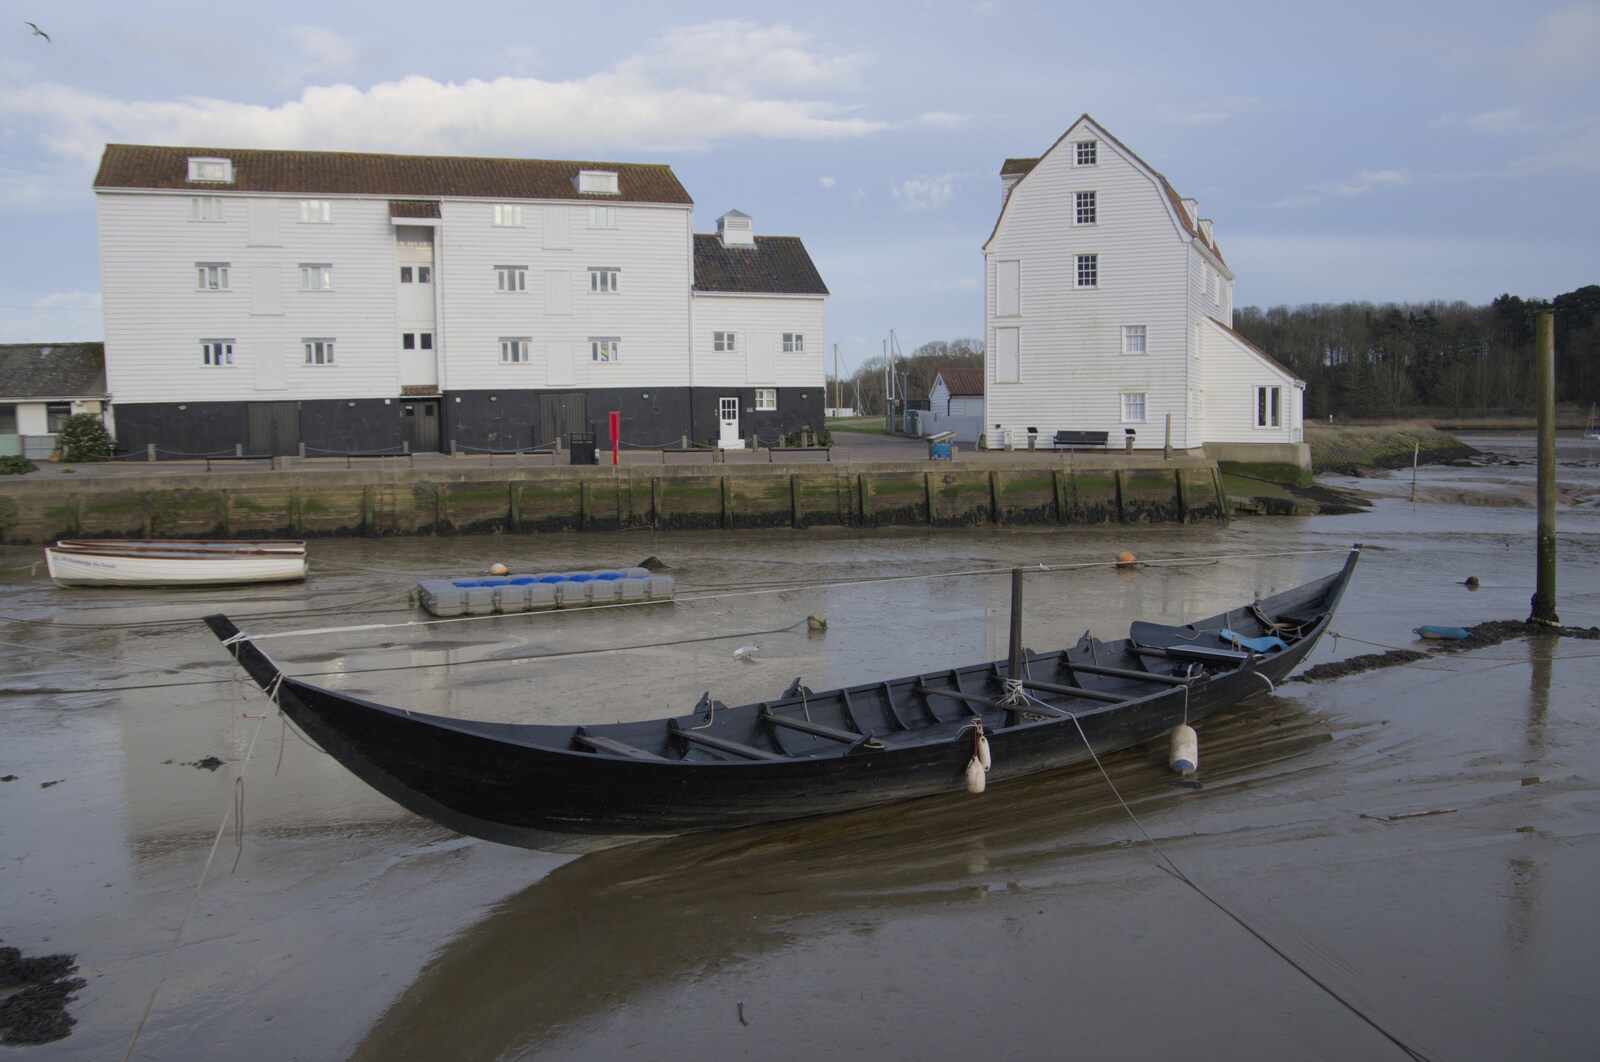 A Saxon-style boat down by the Woodbridge Tide Mill from Riddlequest at Sutton Hoo, Woodbridge, Suffolk - 23rd February 2024